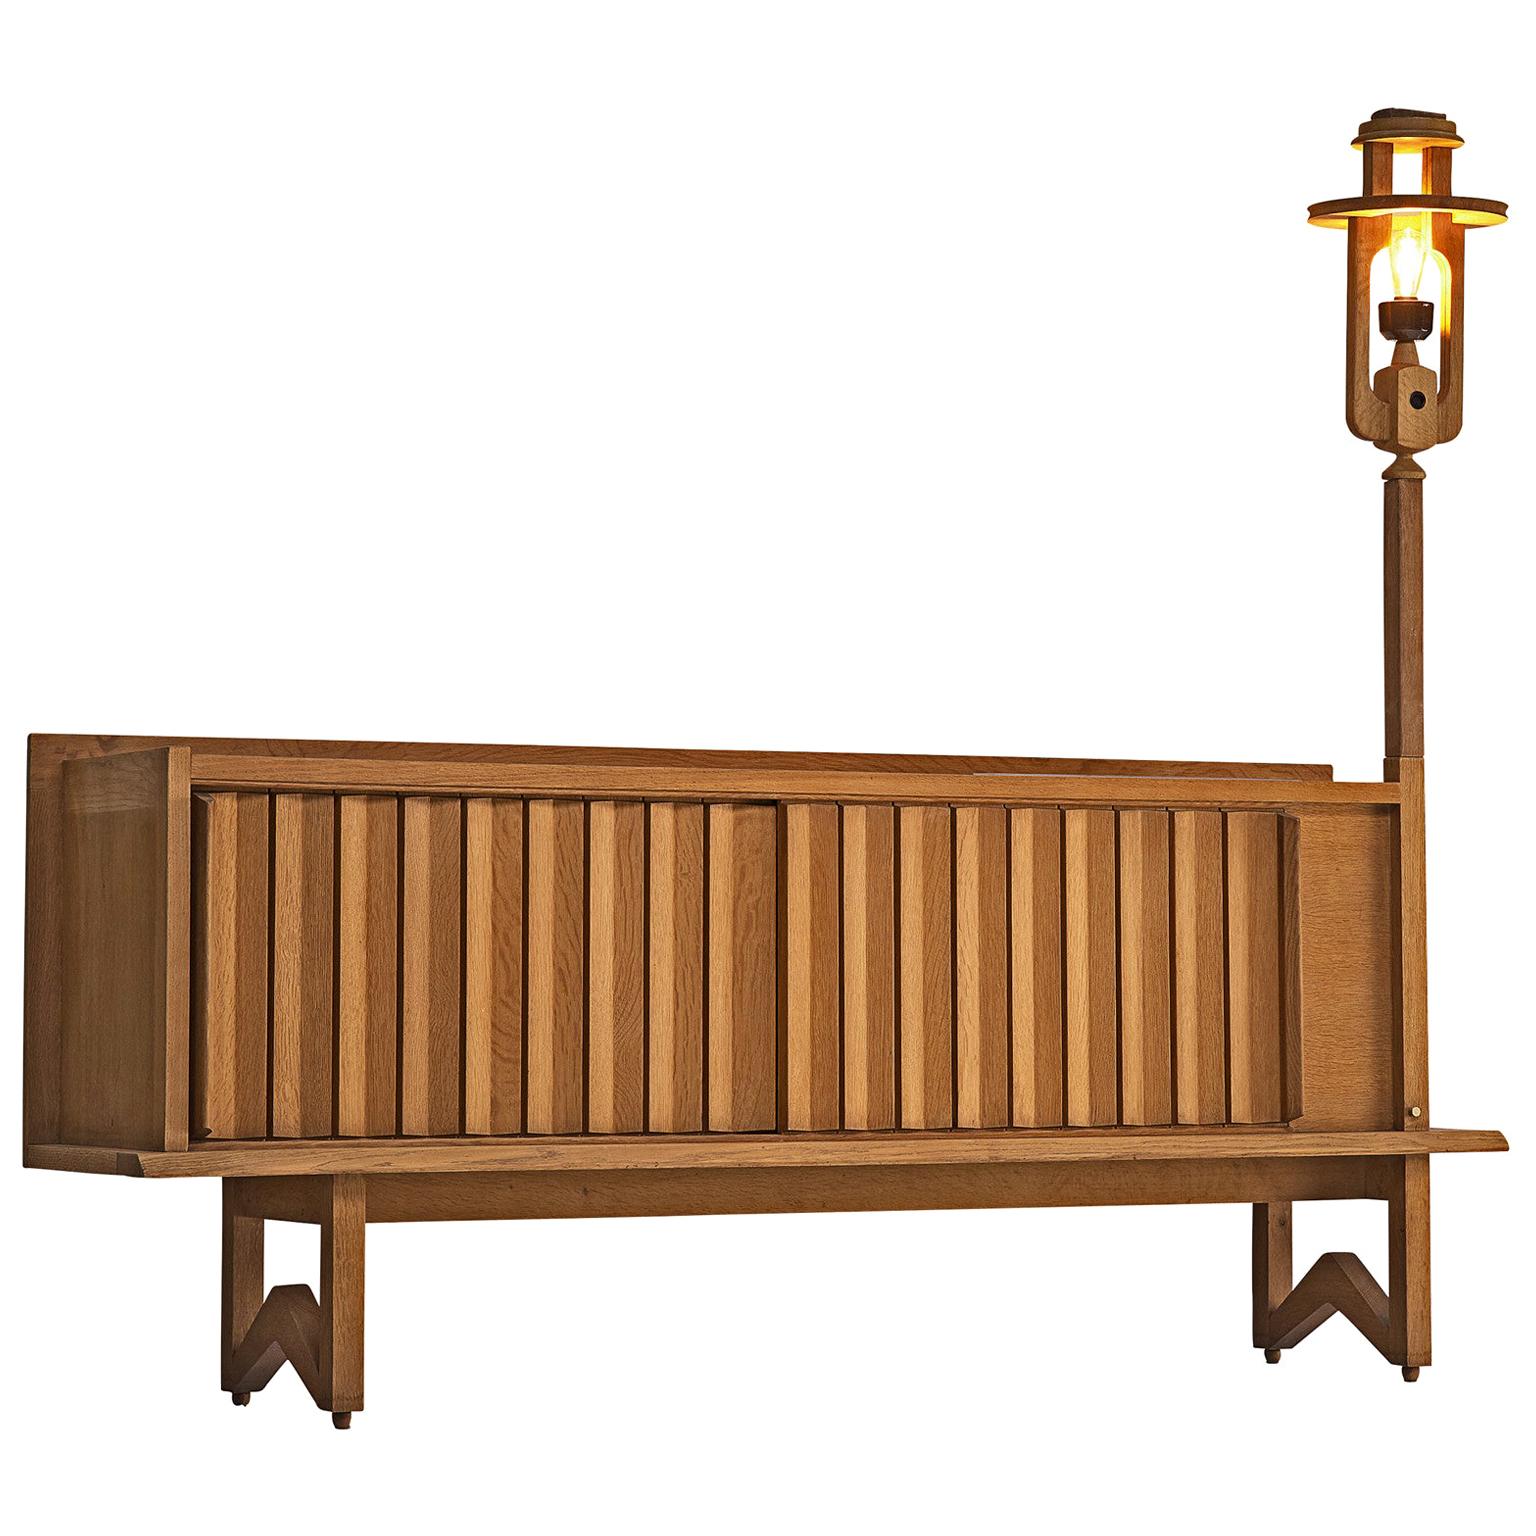 Guillerme & Chambron Credenza in Oak with Lantern